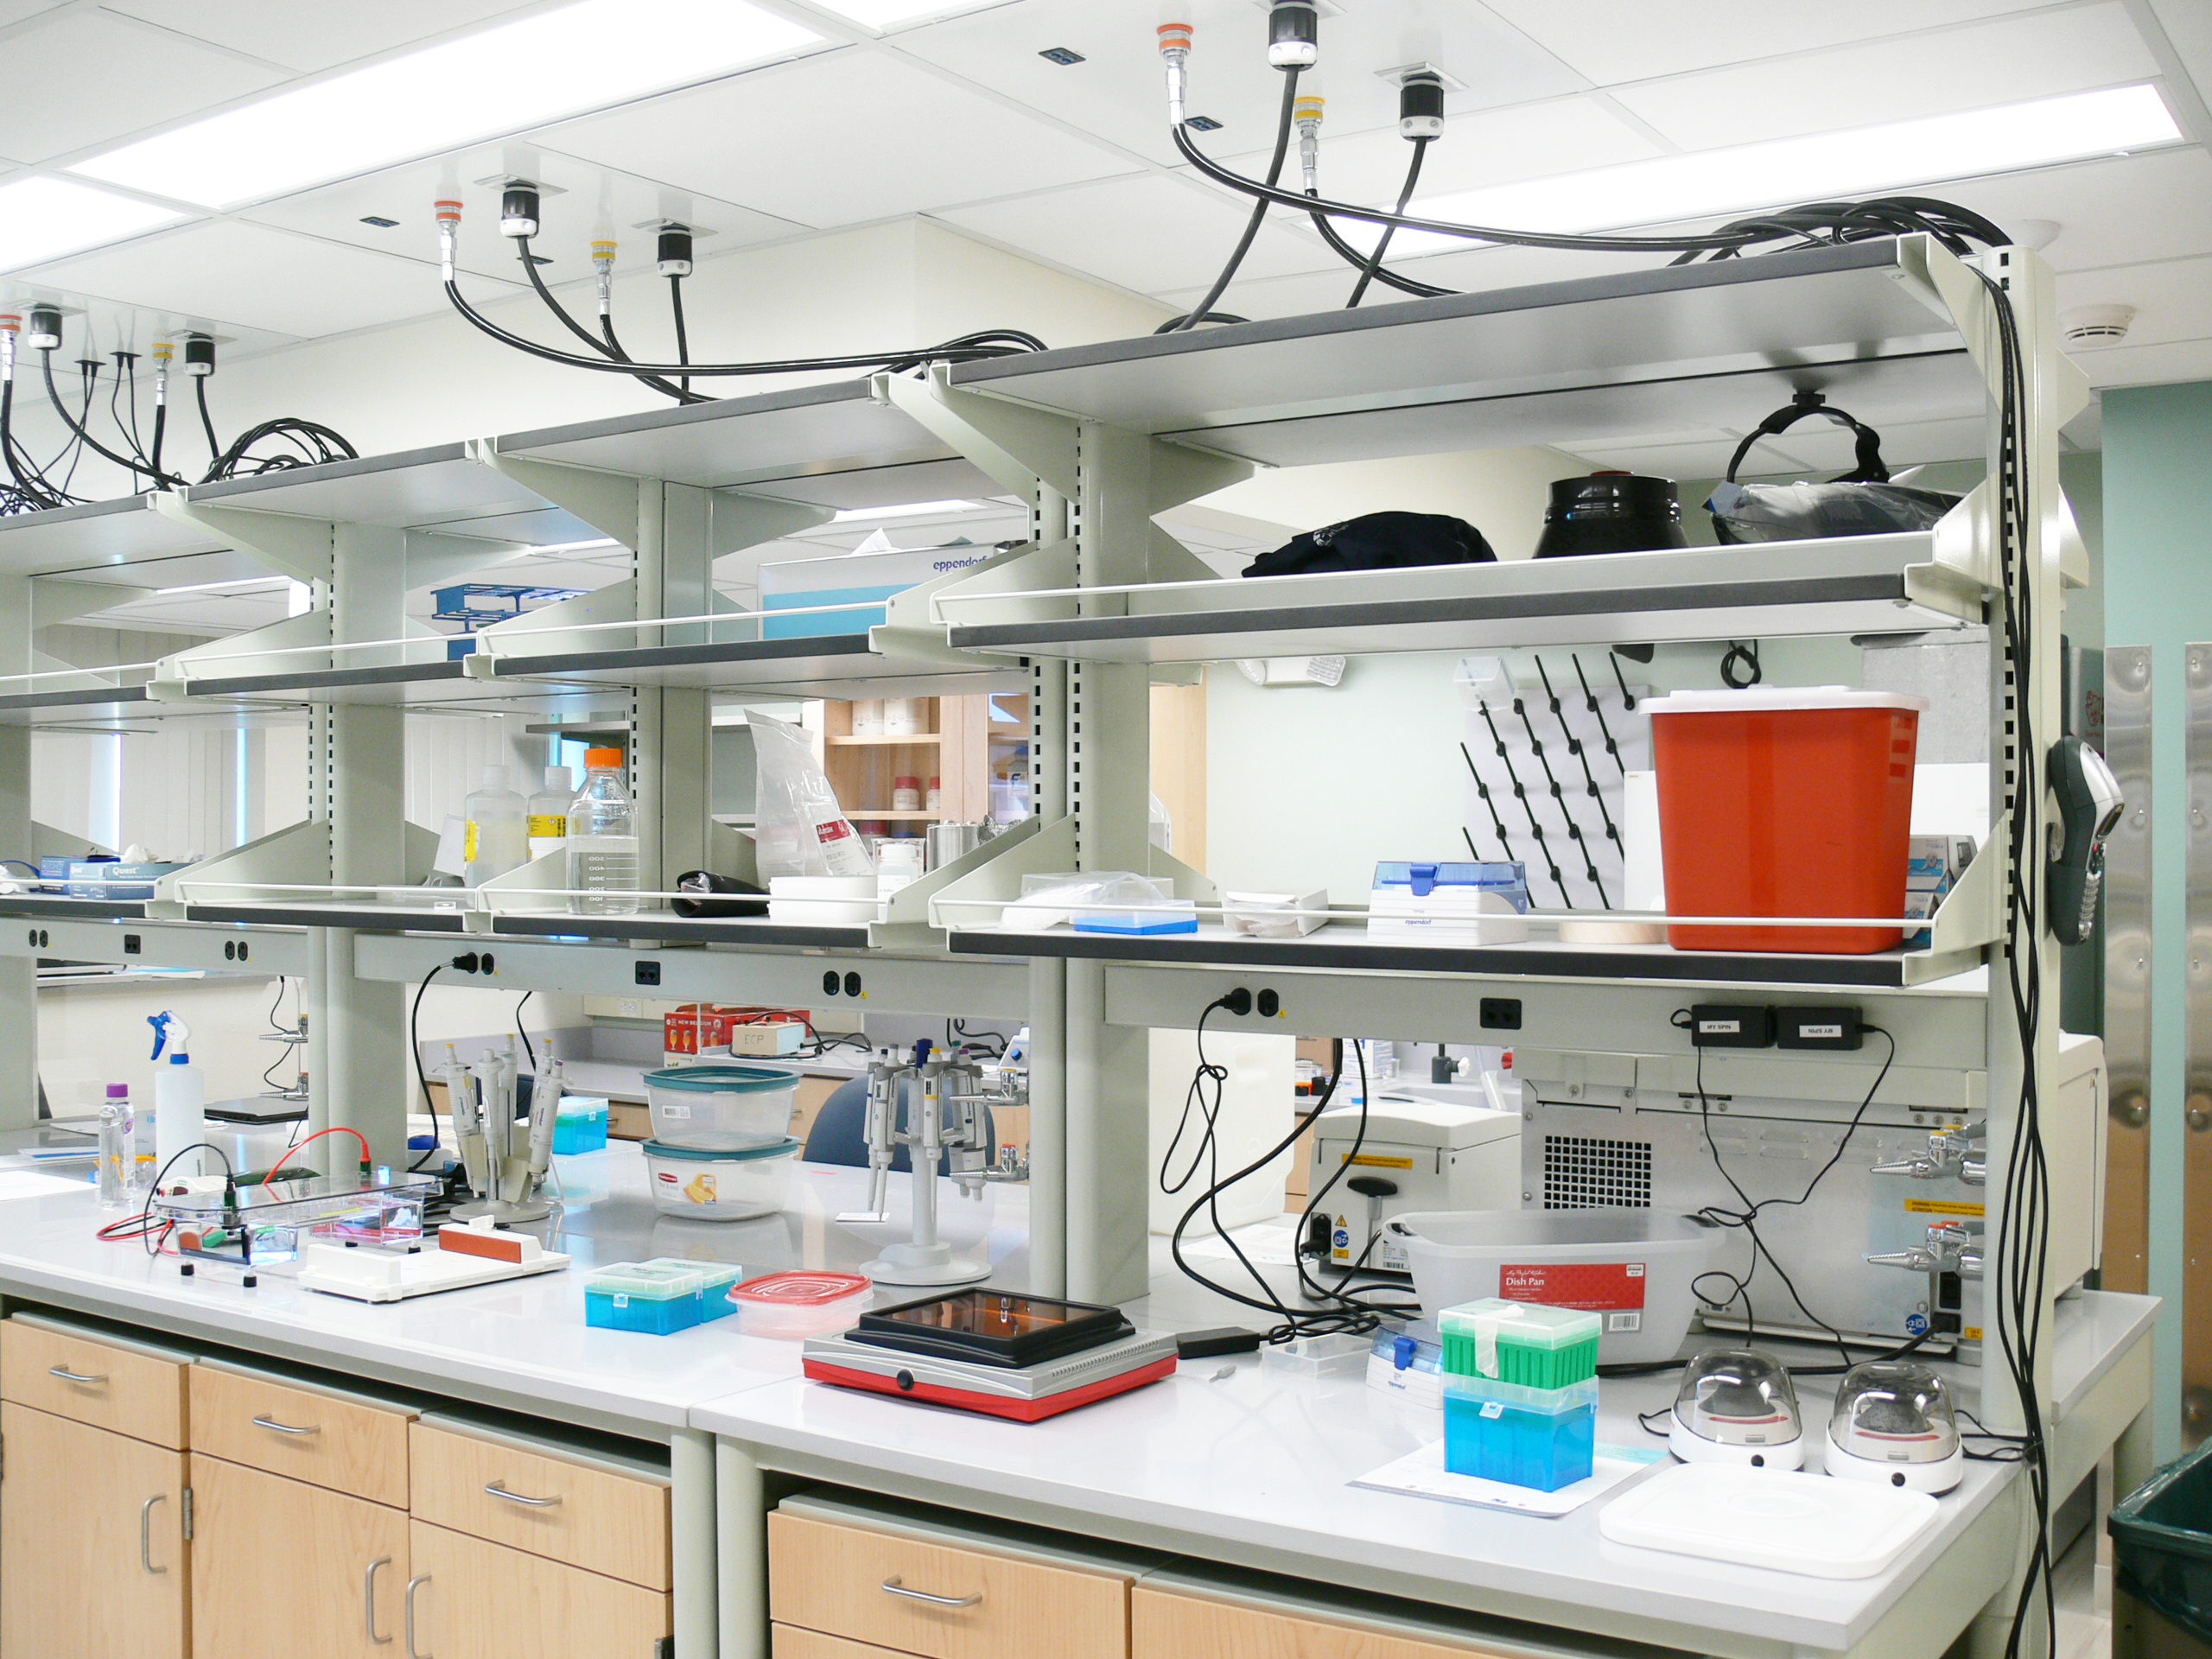 Interior Photo, Morrill Research Laboratory at UMass Amherst, Shelving and Equipment